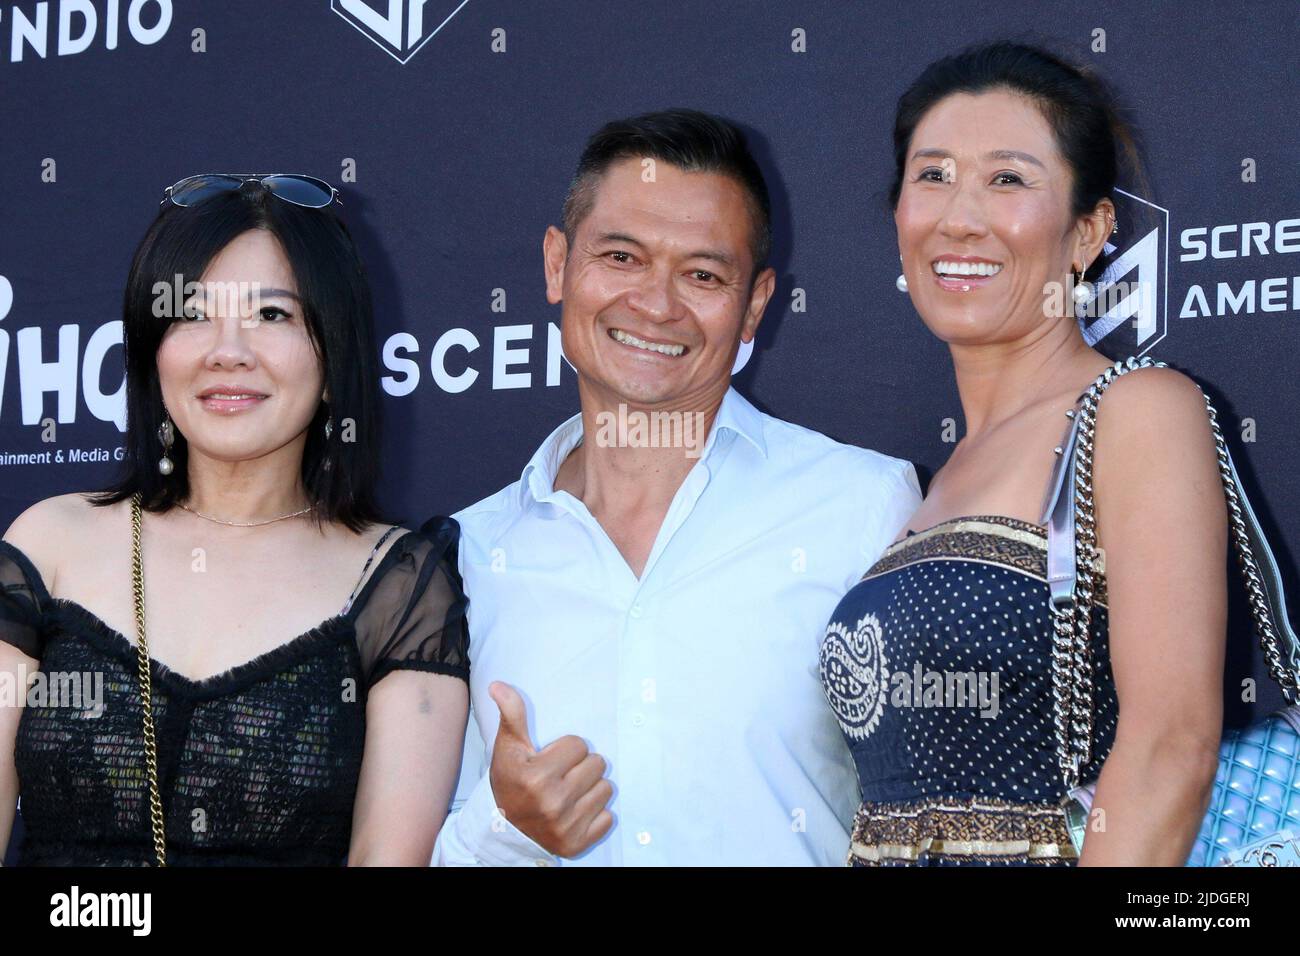 Los Angeles, CA. 20th June, 2022. Vivian Chen, Andy Cheng, Cheng Kai-Chung, Coco Cheng at arrivals for THE KILLER Premiere, Regency Village Theatre, Los Angeles, CA June 20, 2022. Credit: Priscilla Grant/Everett Collection/Alamy Live News Stock Photo